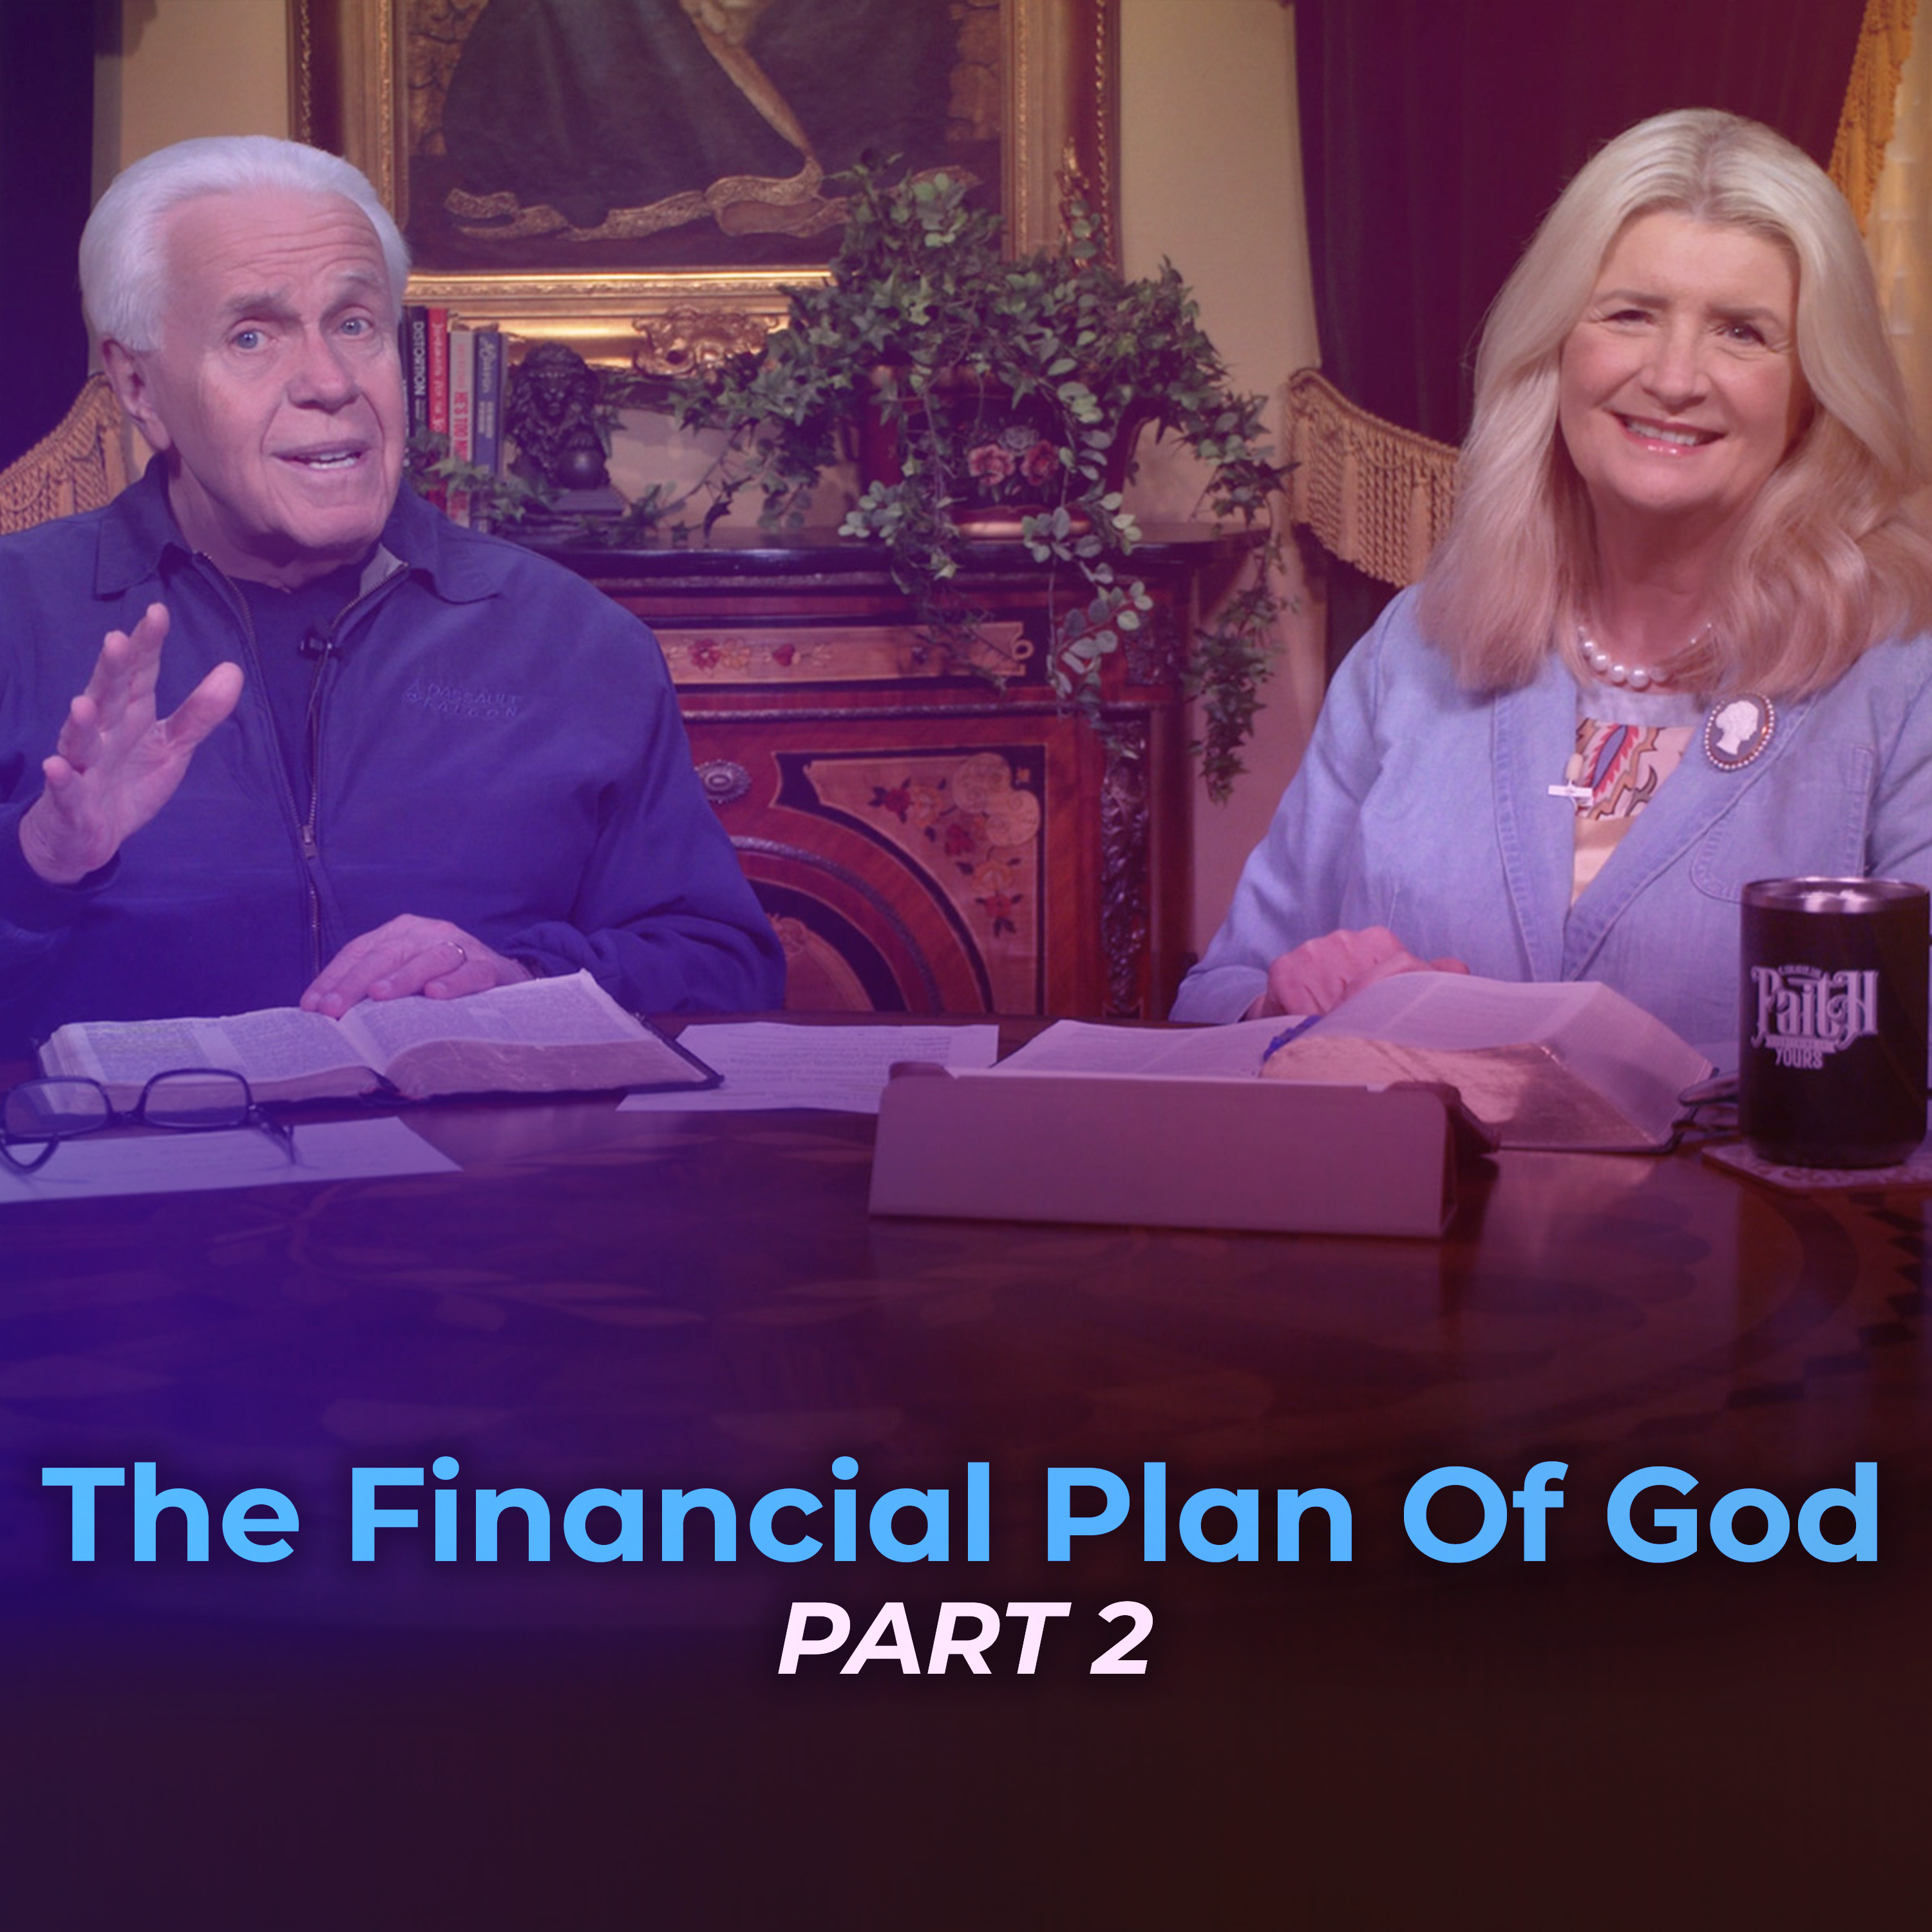 The Financial Plan Of God, Part 2